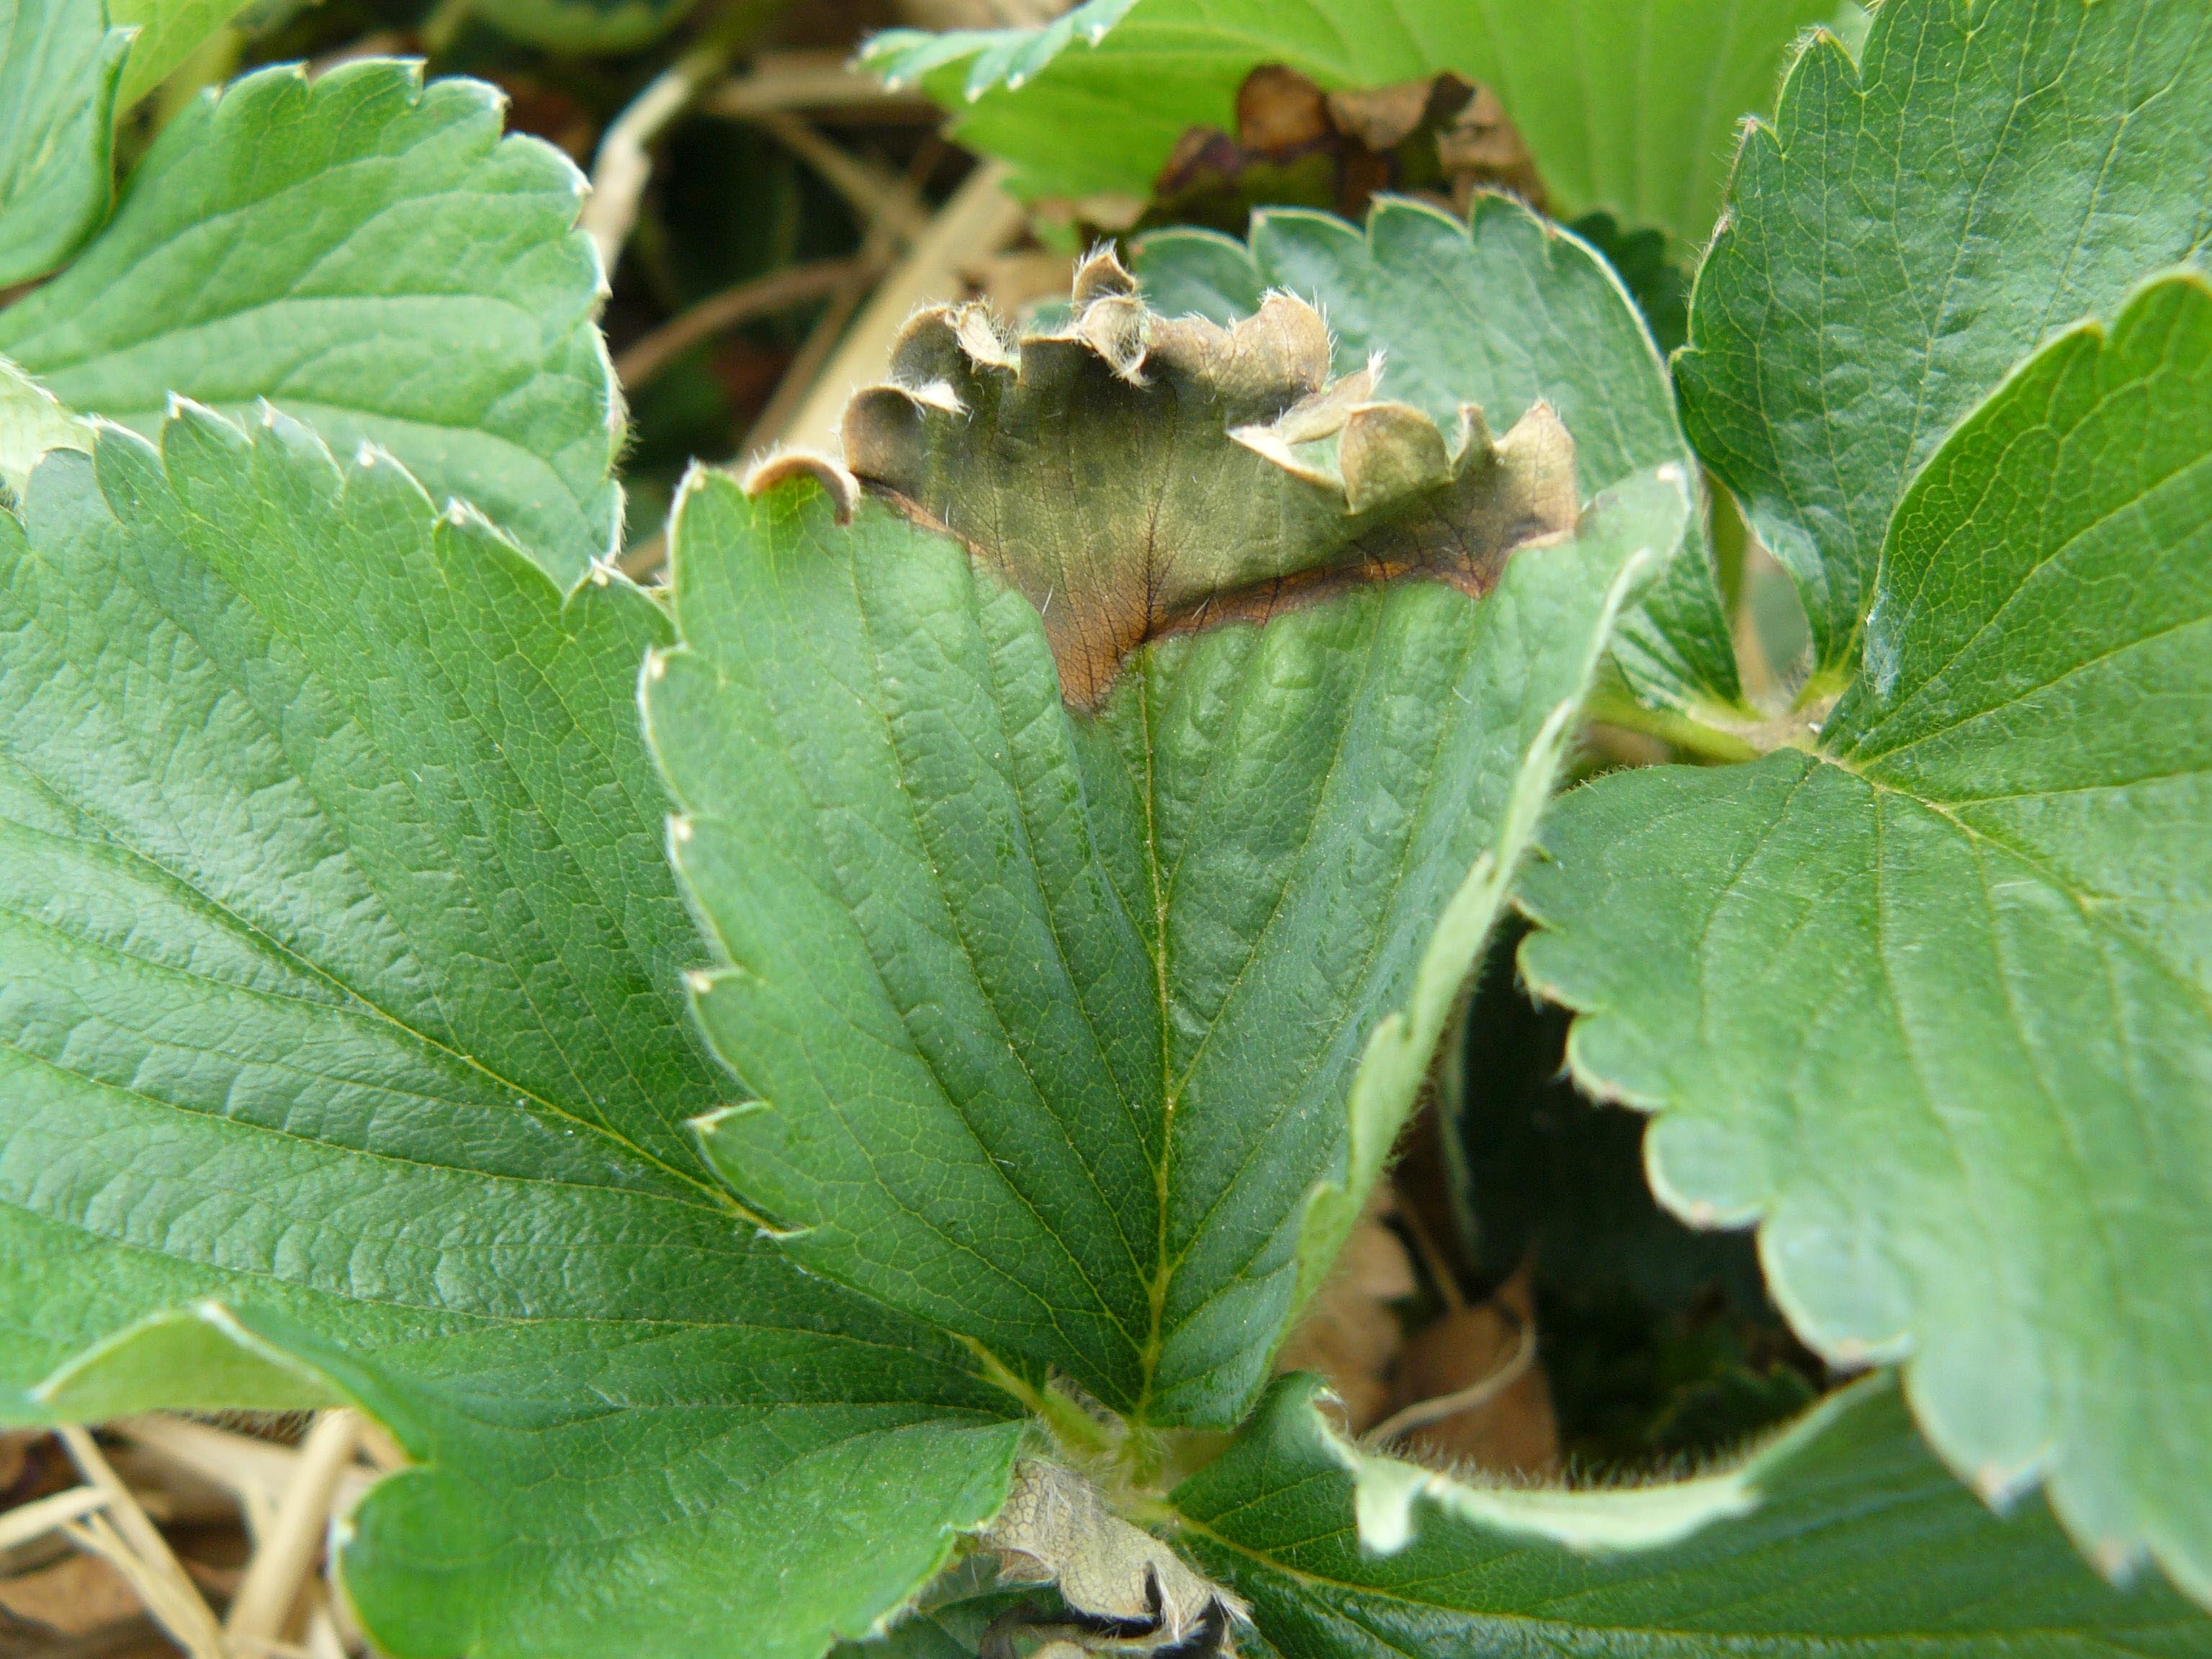 Strawberry plant leaf with brown and desiccated tip from frost damage.